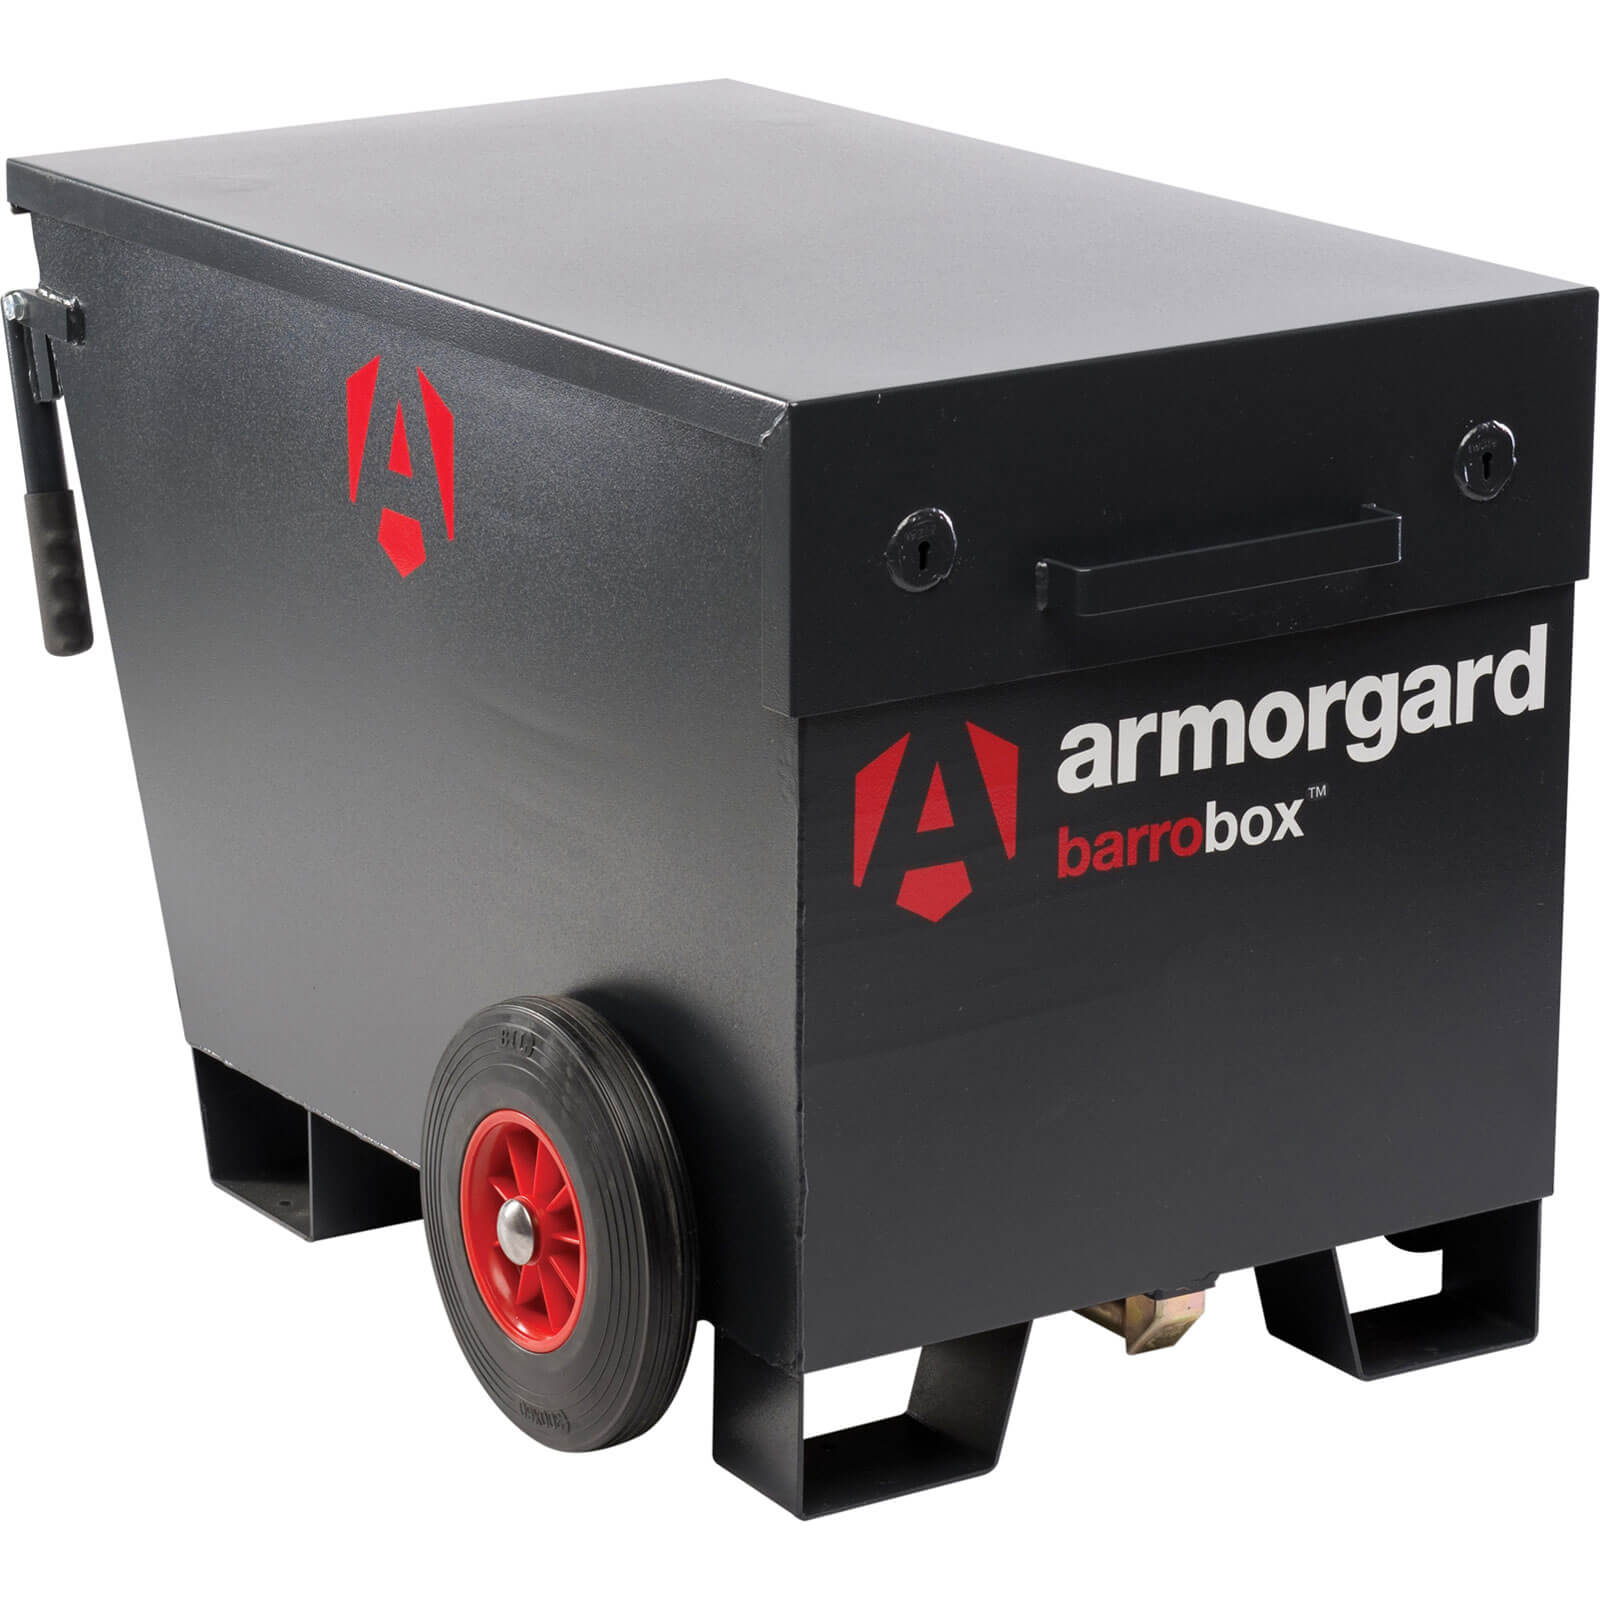 Image of Armorgard Barrobox Mobile Site Secure Tool Box 740mm 1095mm 720mm